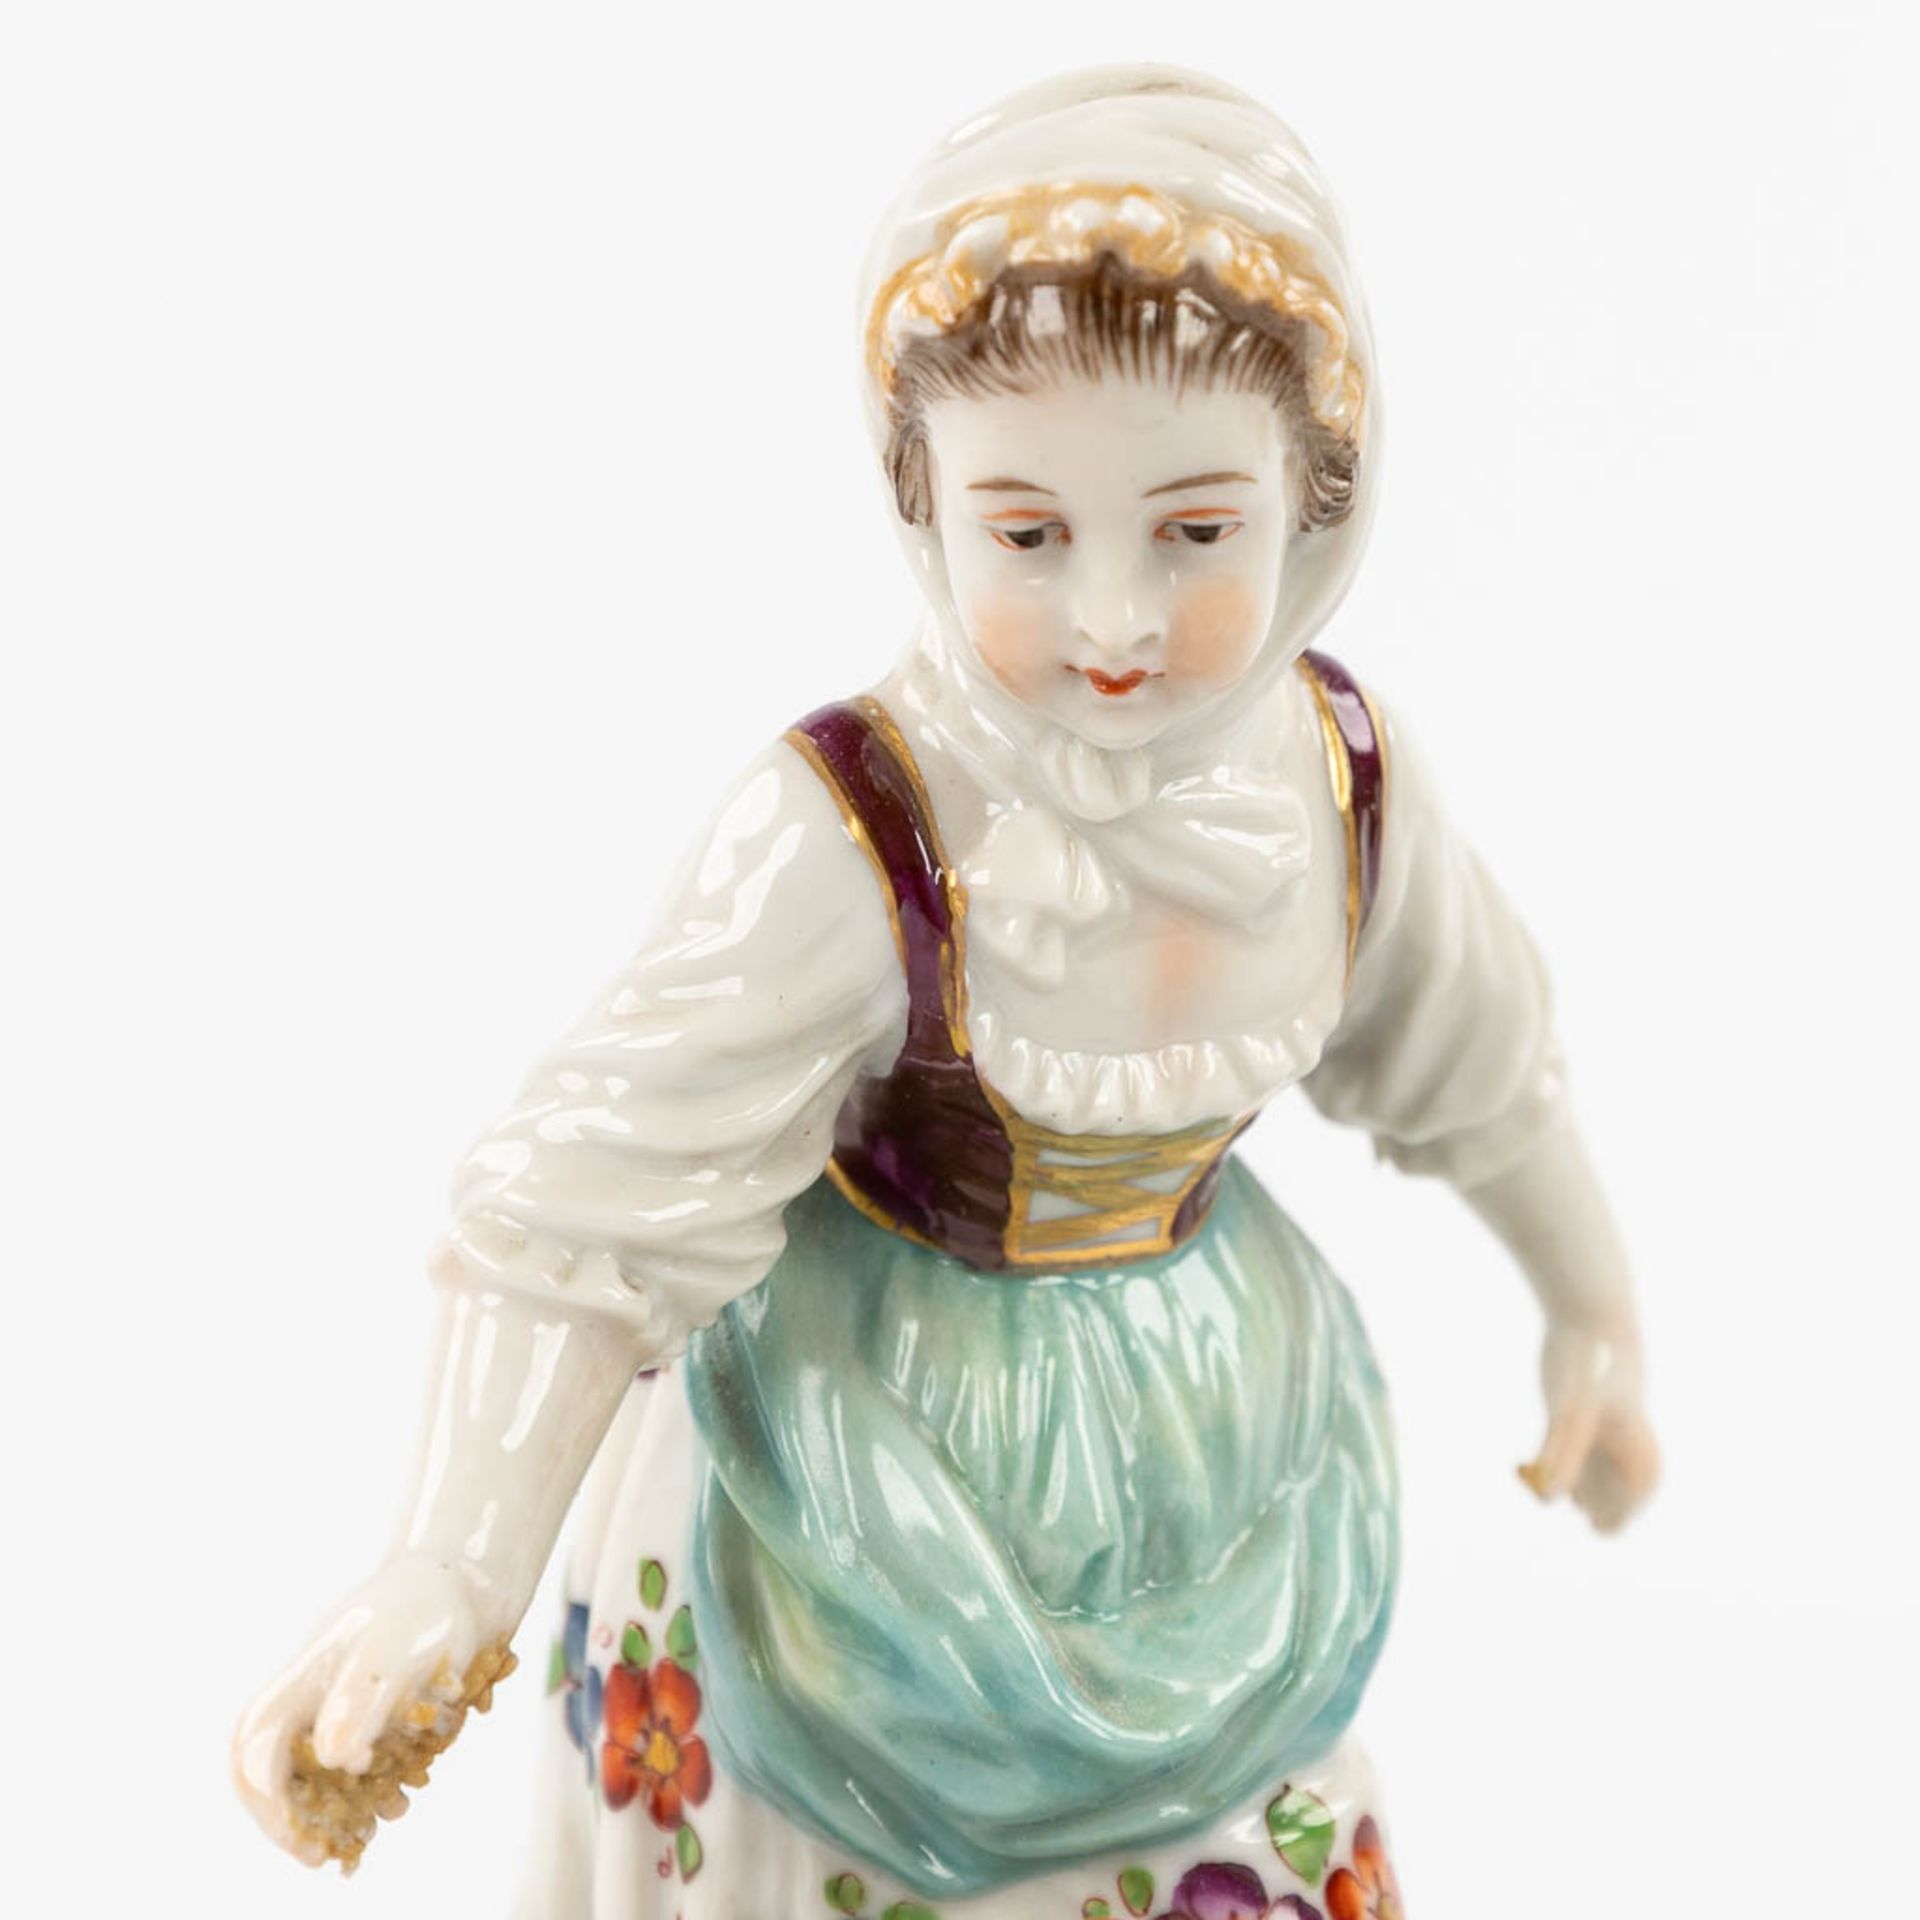 Volkstedt, a collection of 2 figurines made of porcelain in Germany. (H:13 cm) - Image 4 of 14